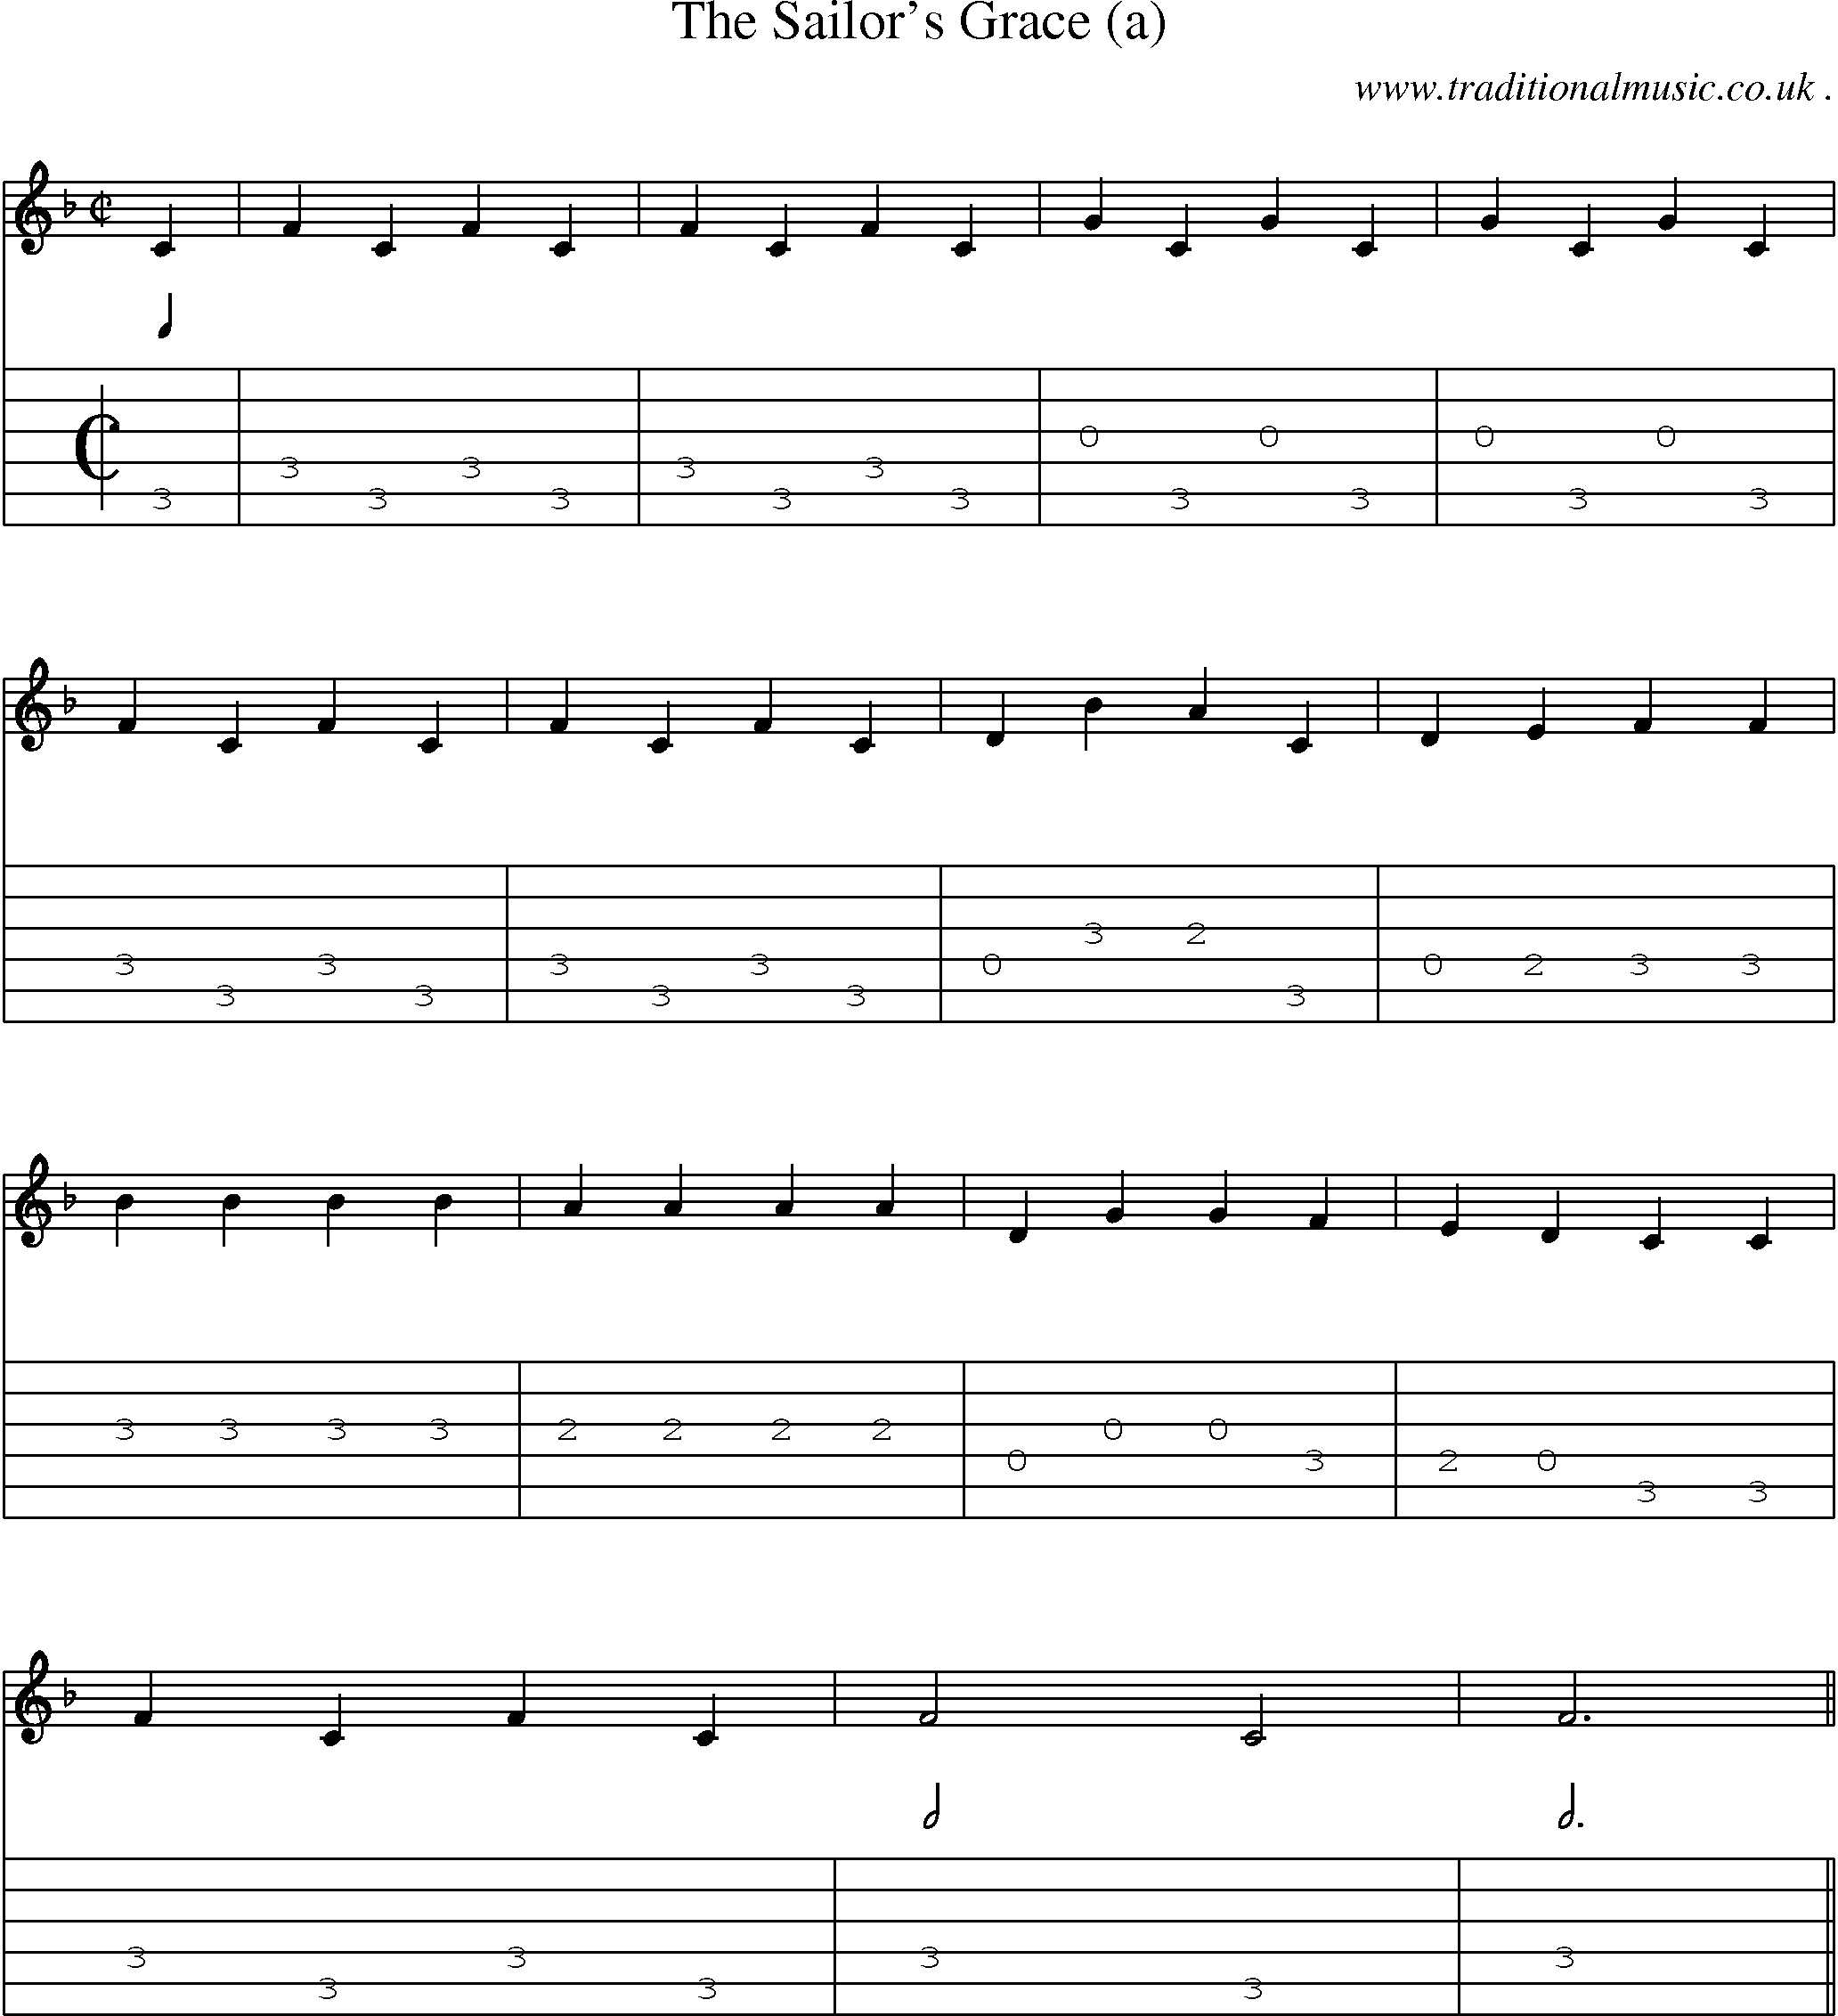 Sheet-Music and Guitar Tabs for The Sailors Grace (a)